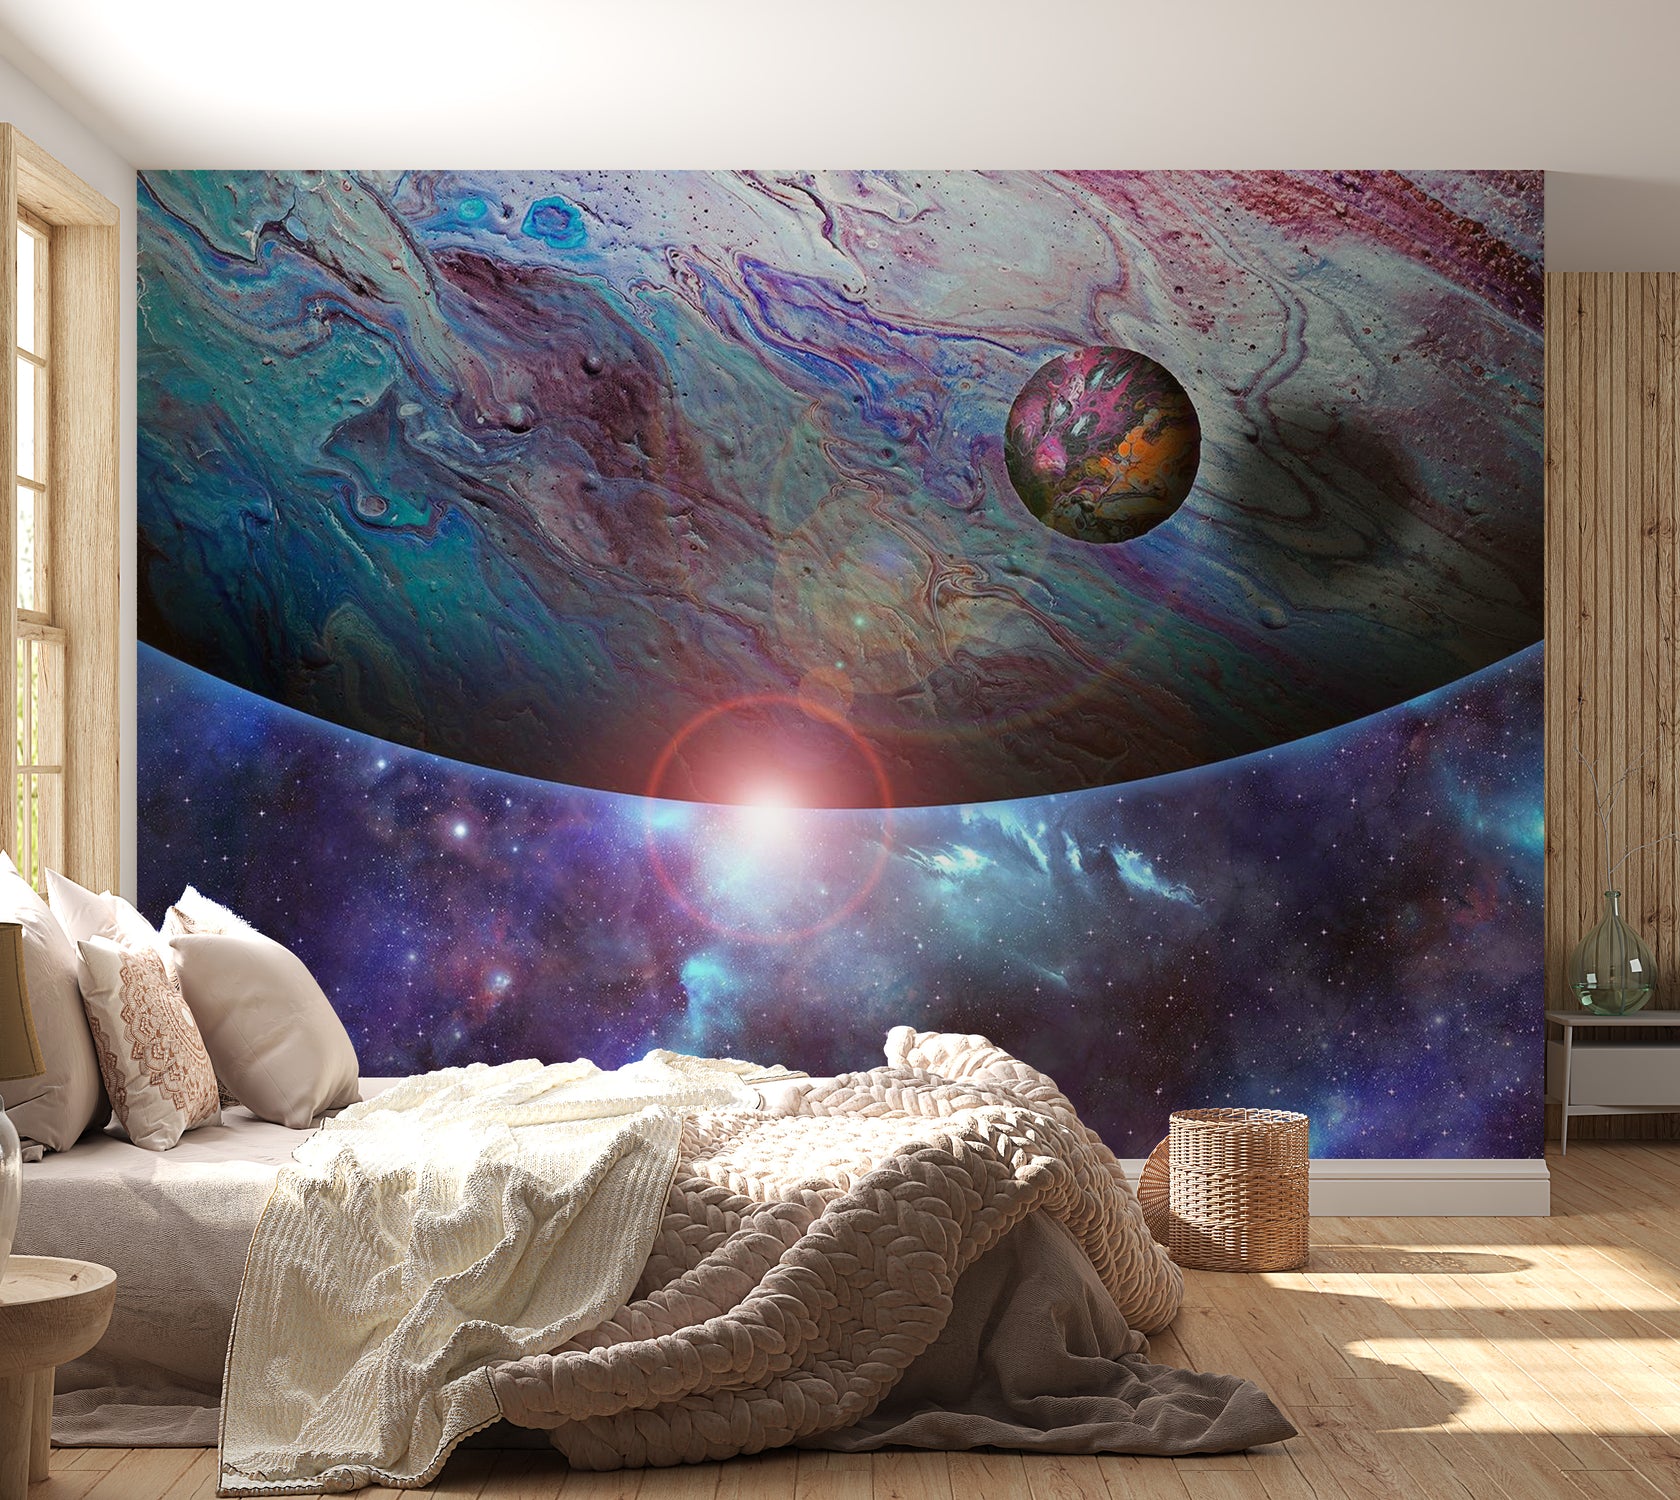 Peel & Stick Space Wall Mural - In Orbit - Removable Wall Decals